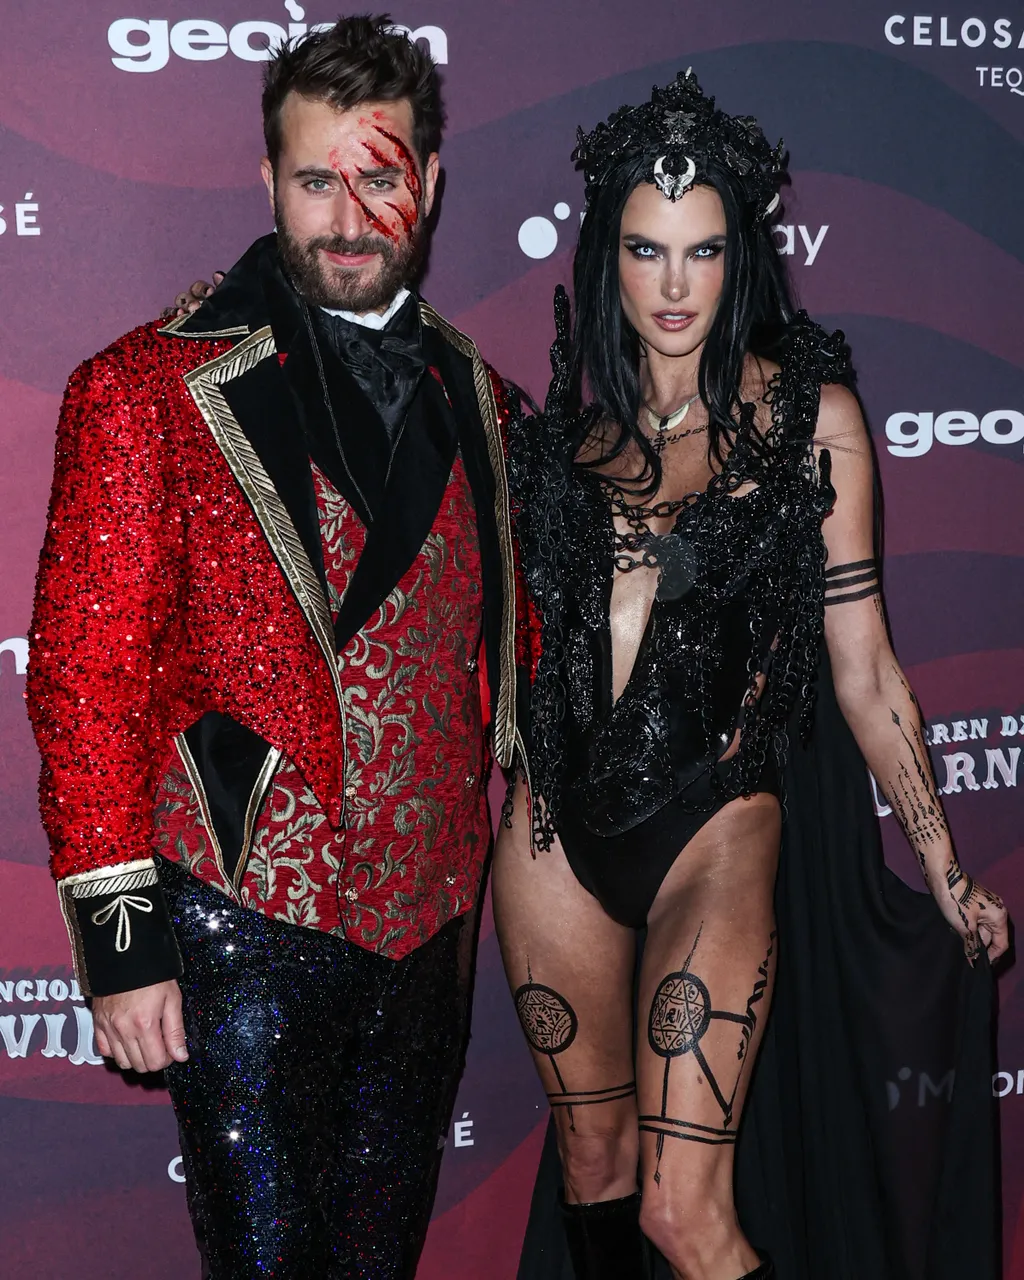 Alessandra Ambrosio brazil modell halloween,CARN*EVIL Halloween Party USA United States IDSOK America NurPhoto California CA LA West Coast Los Angeles Hollywood Bel Air County Arts Culture Editorial Arrivals Attending Celebrities Posing 2022 Photography I